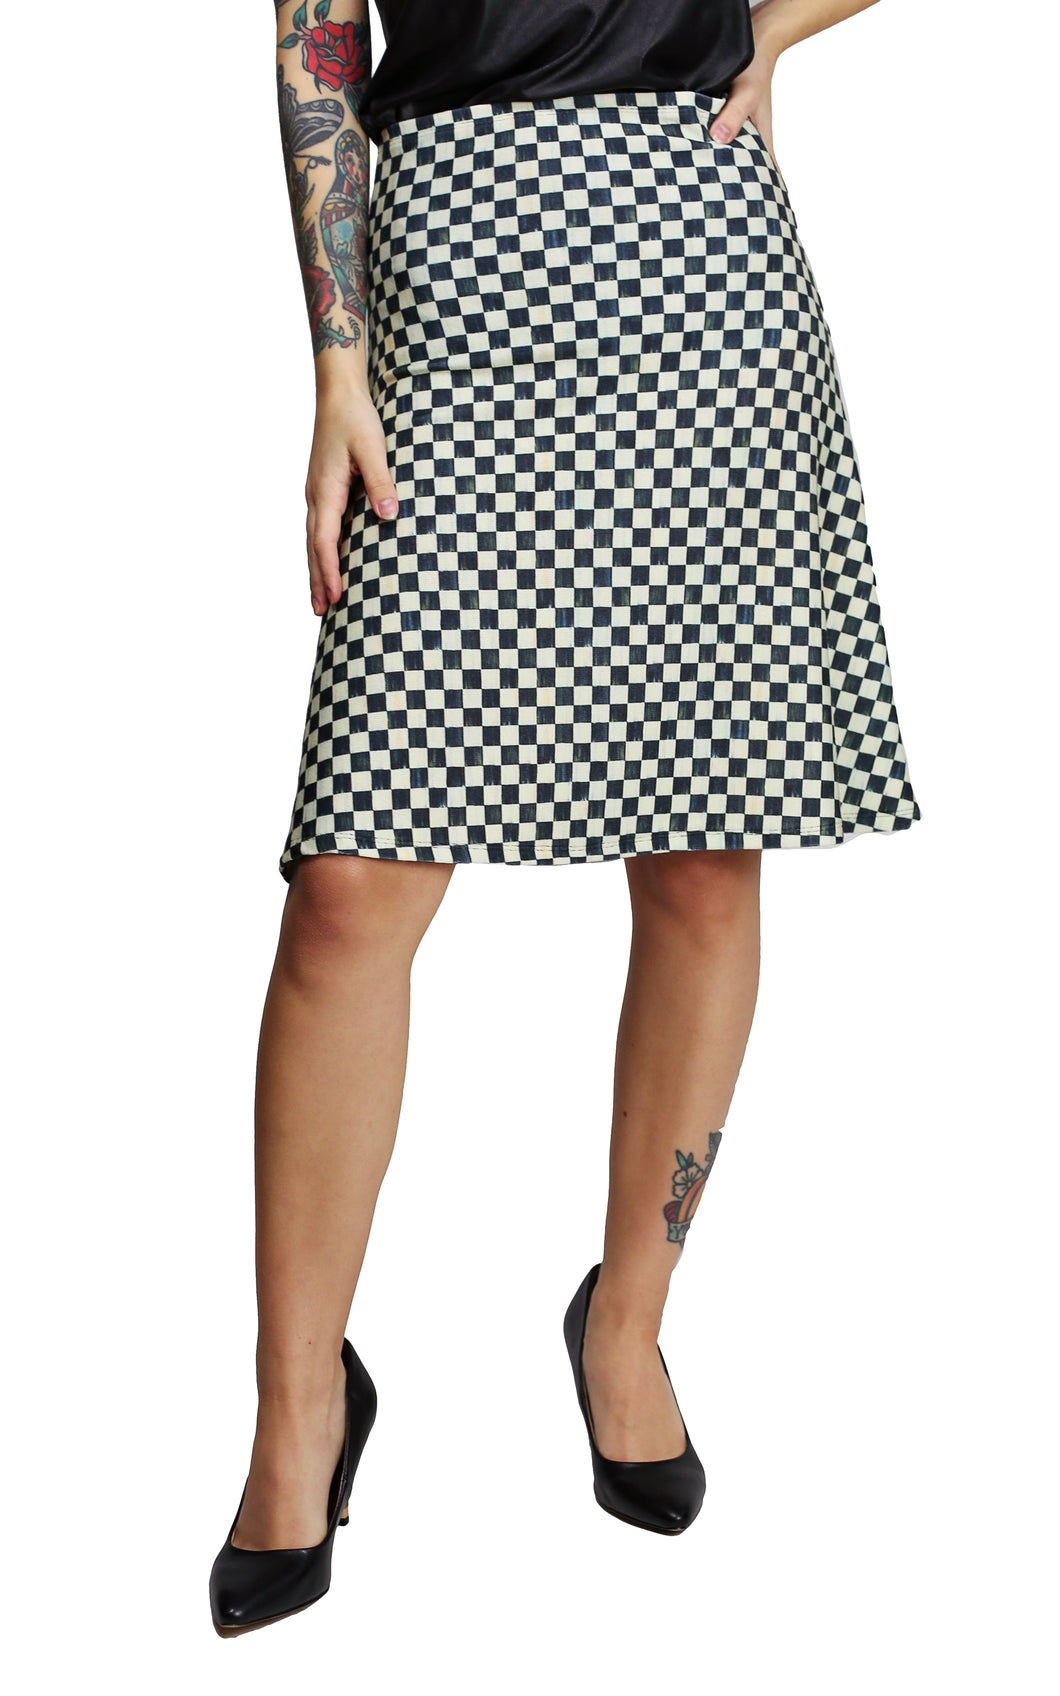 checker board skirt from ipng